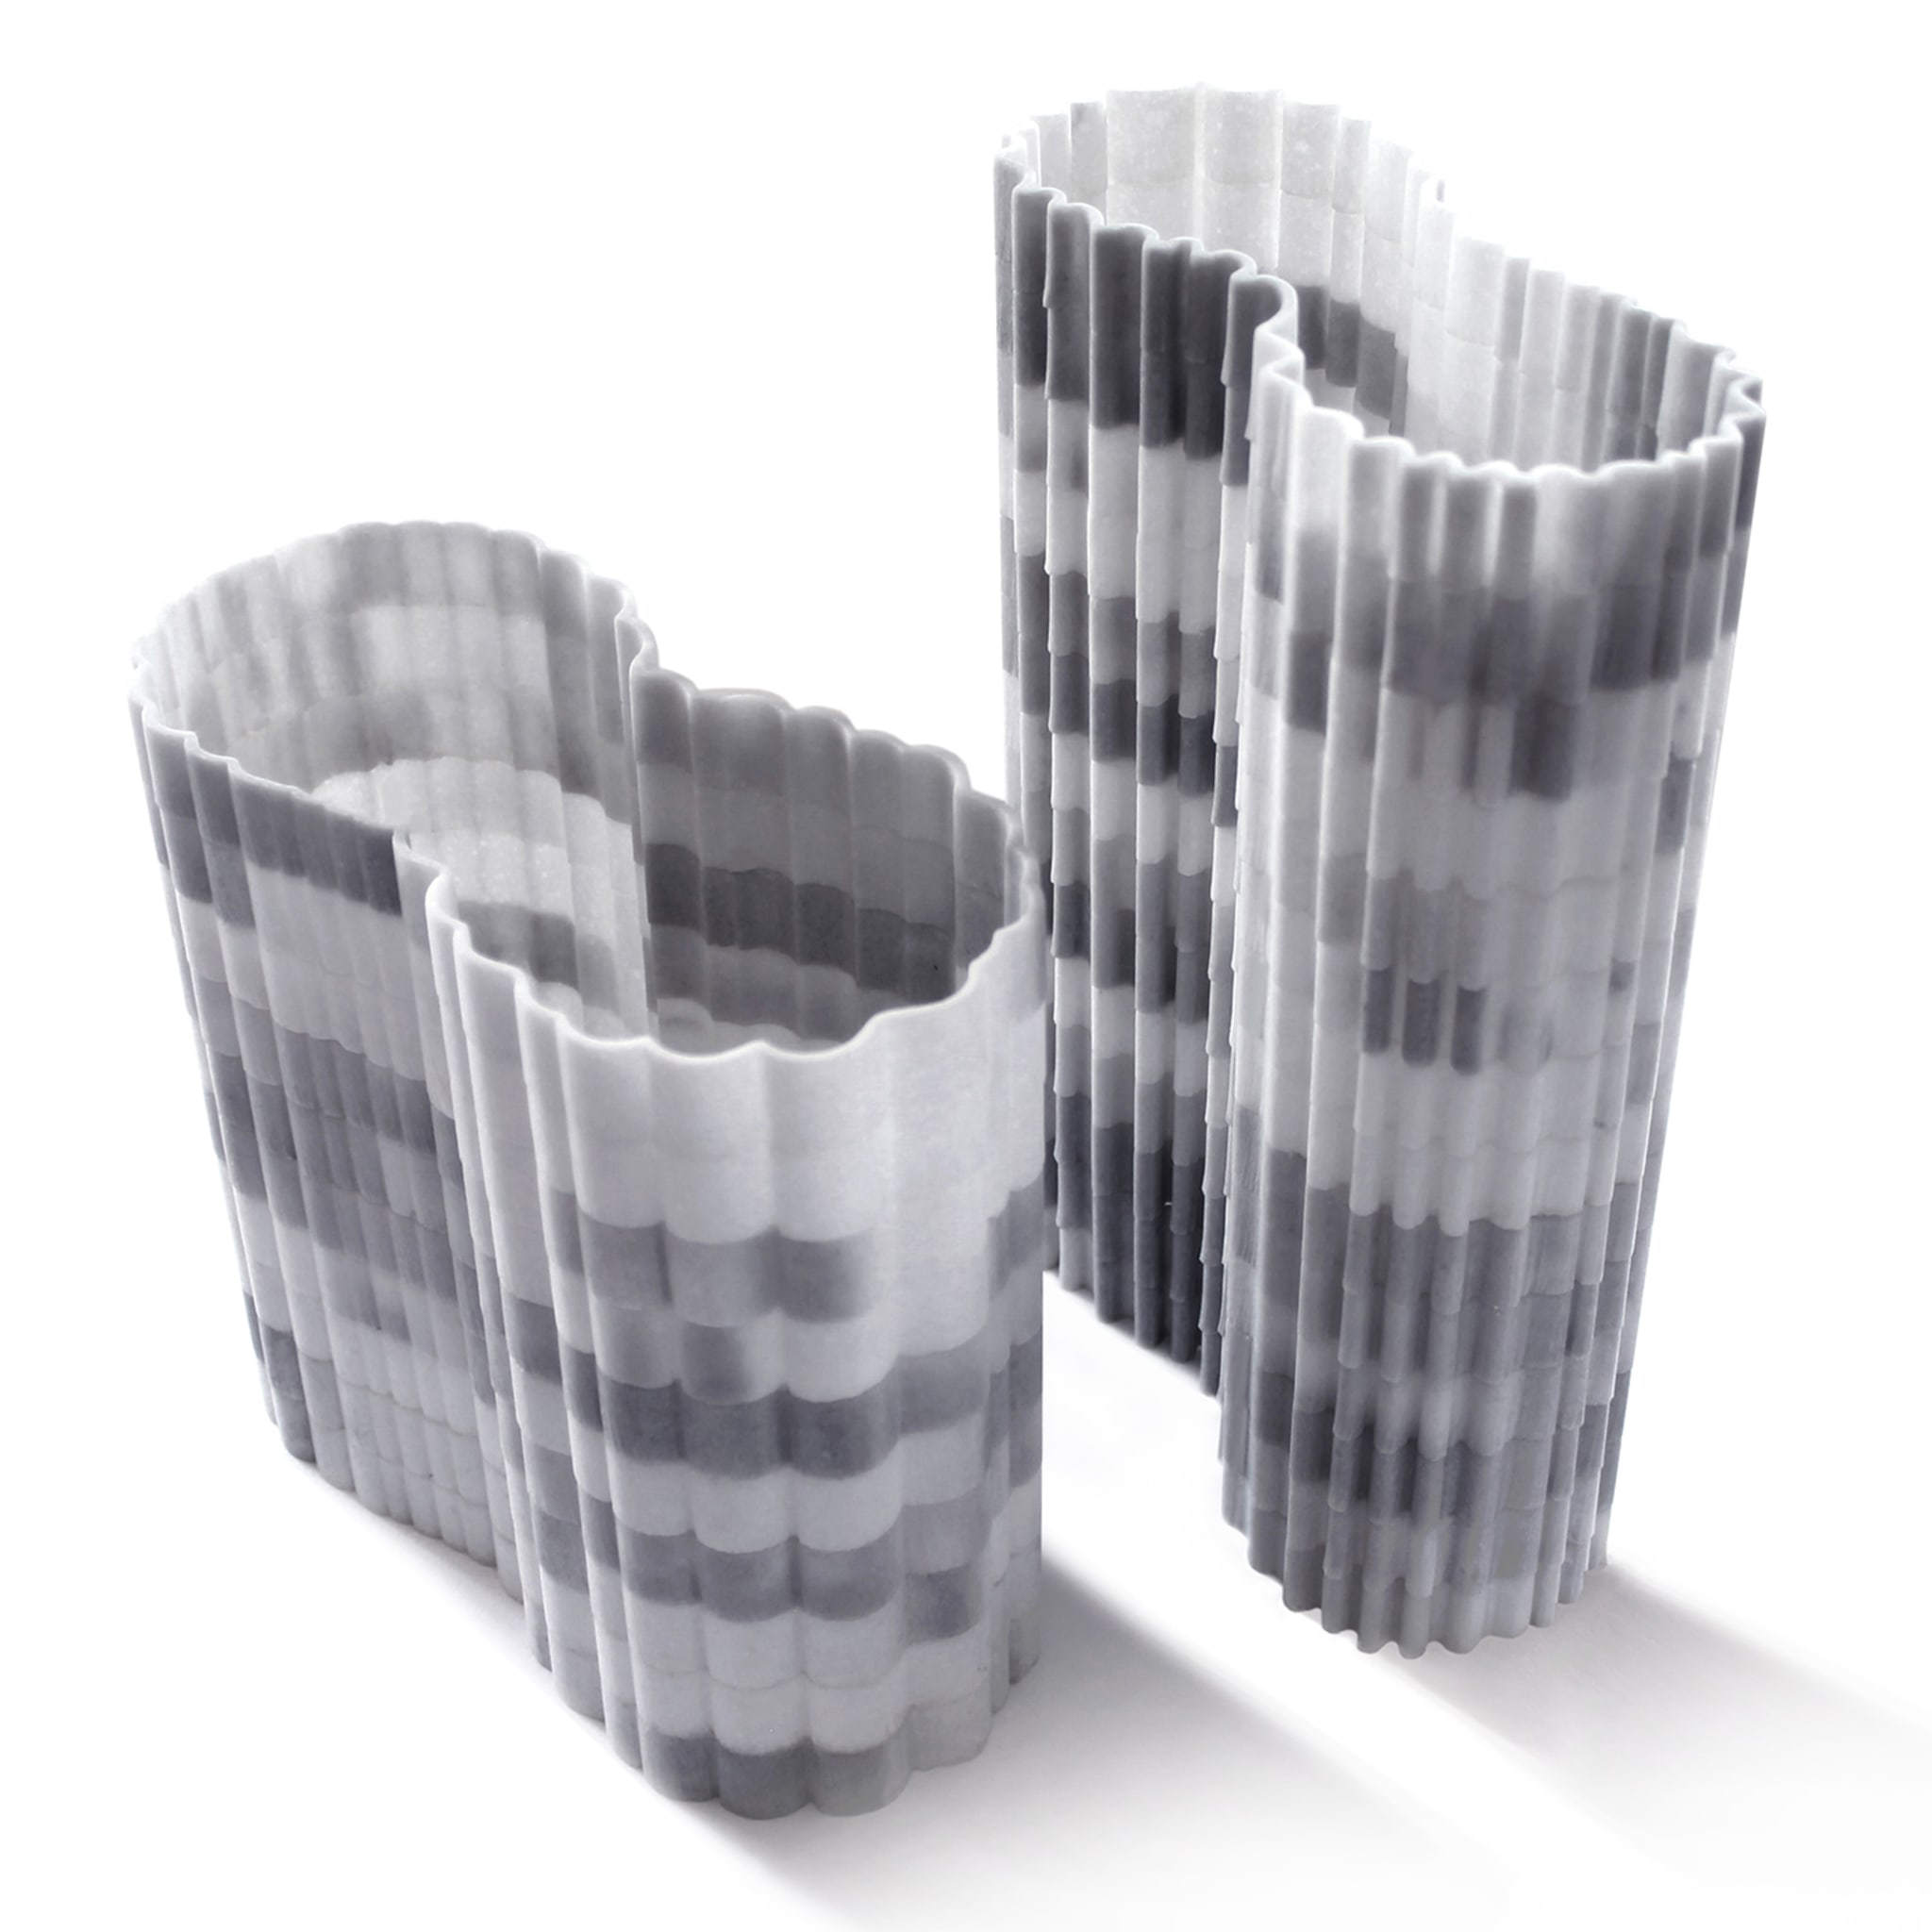 Stripes Vase Olimpic White Marble #2 by Paolo Ulian - Alternative view 1